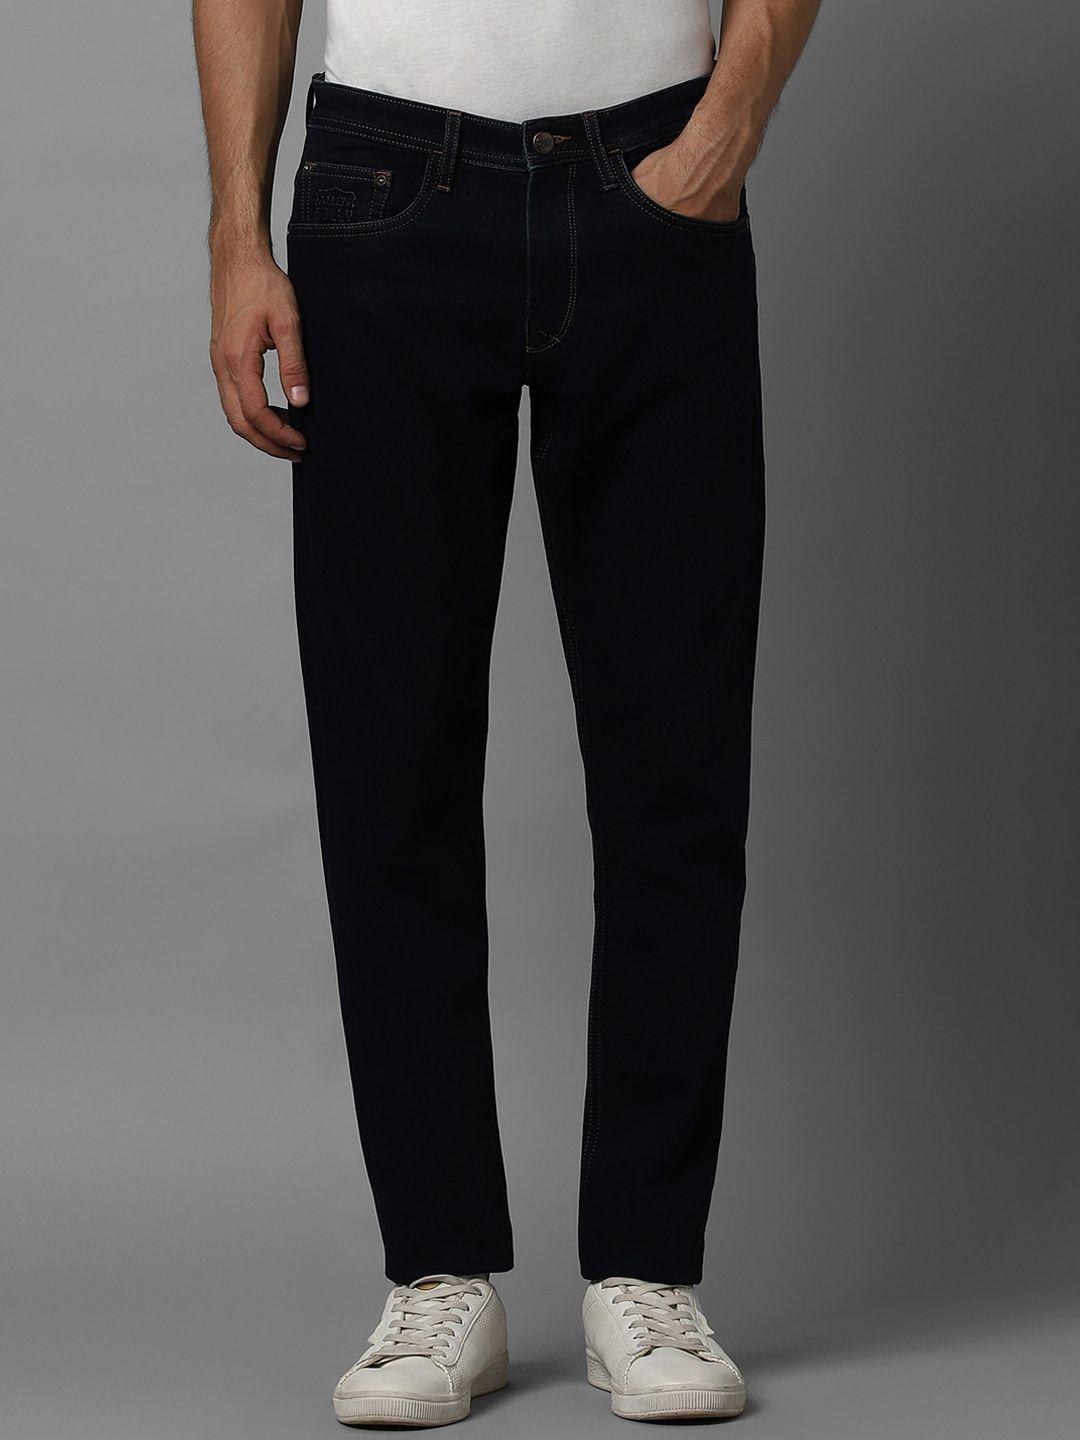 allen solly men slim fit mid-rise stretchable jeans